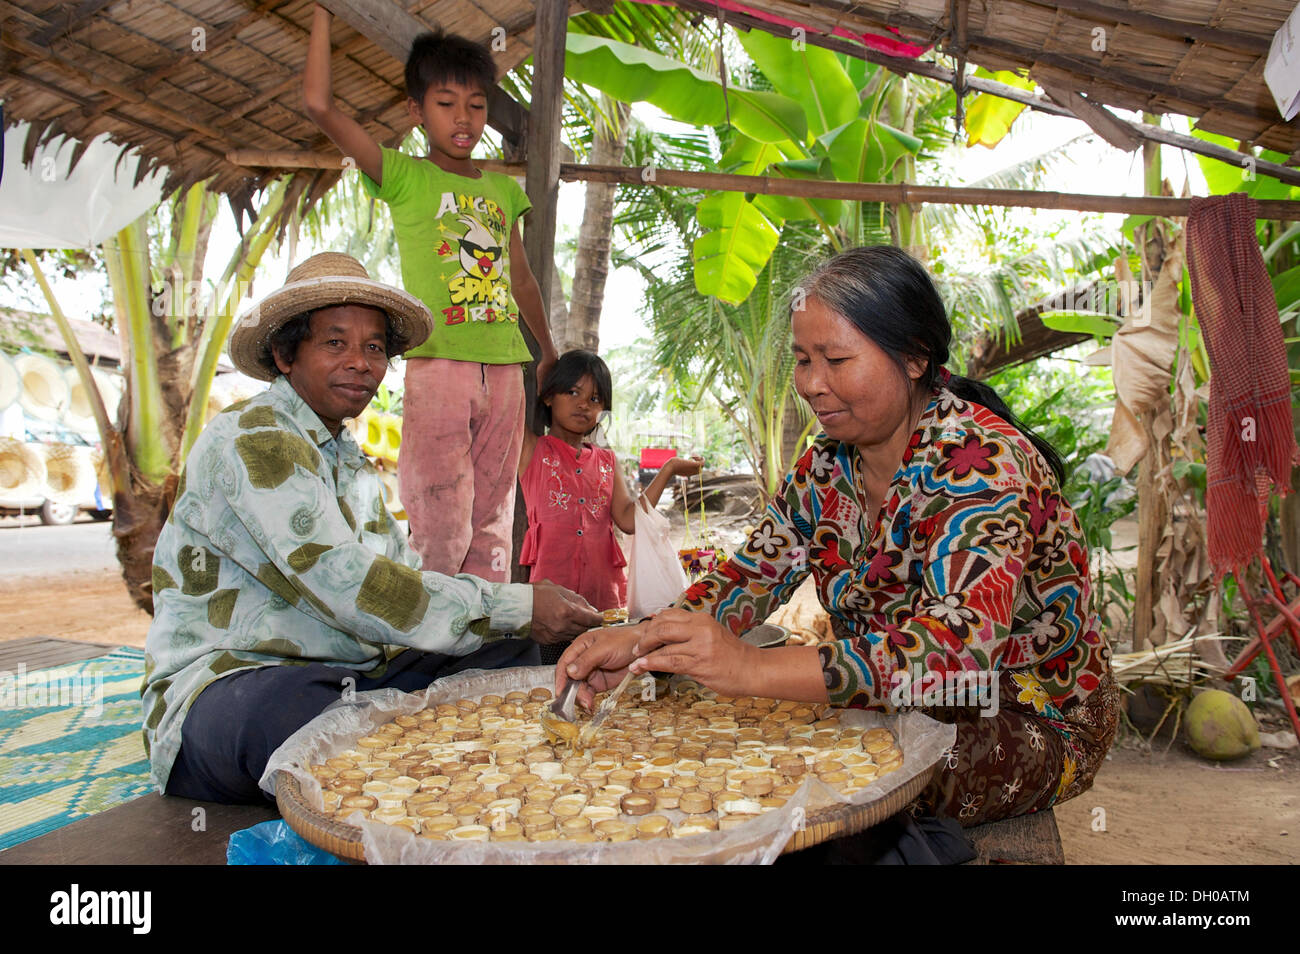 Woman pouring hot palm sugar in forms made of bamboo, Siem Reap, Siem Reap, Siem Reap Province, Cambodia Stock Photo